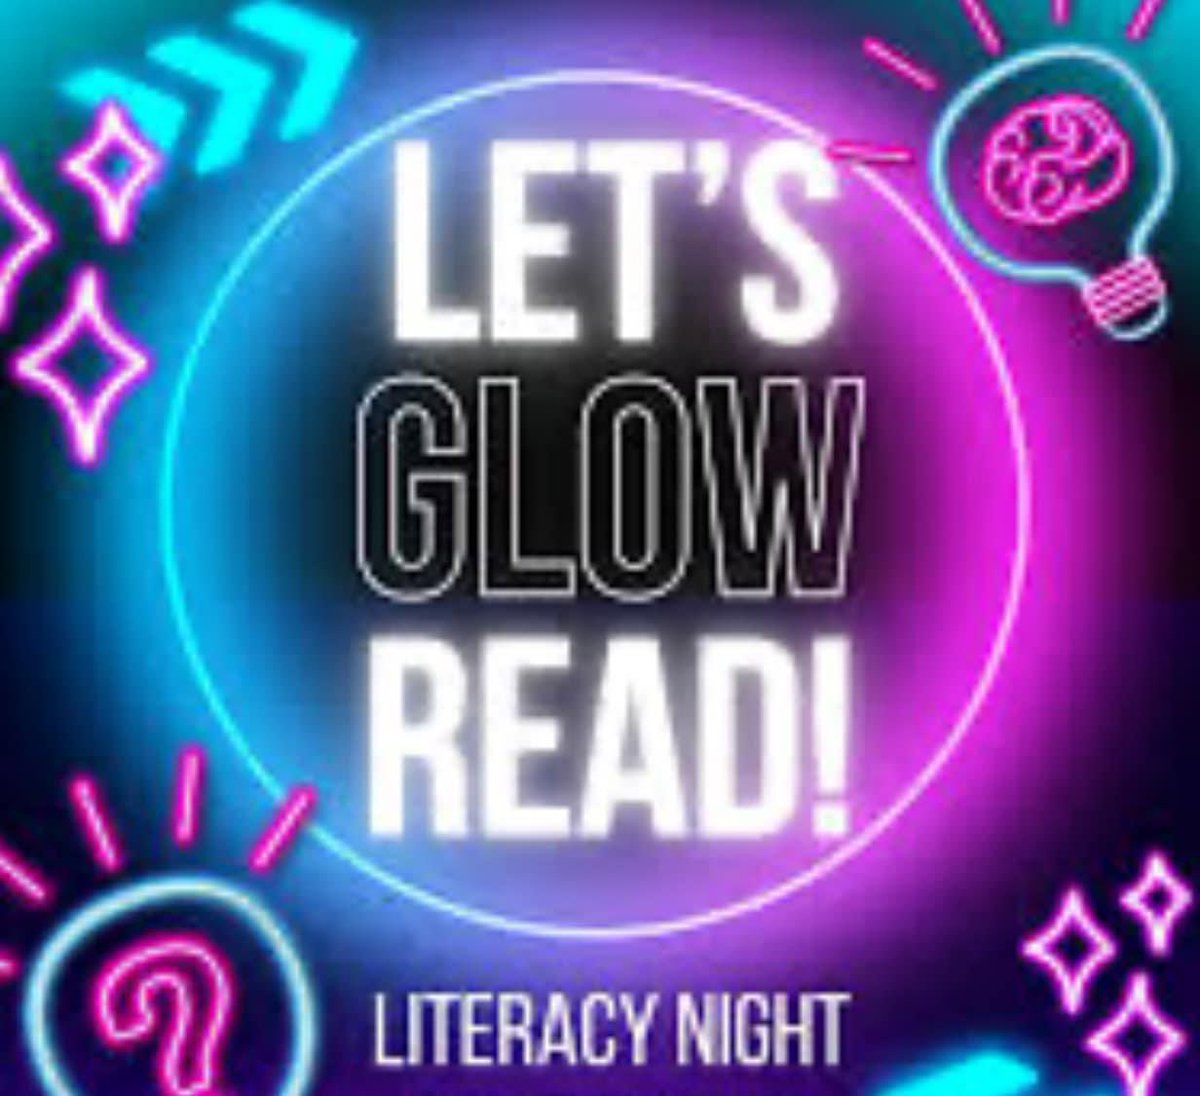 A heartfelt thank you to the amazing supporters of our 'Let's Glow Read' Literacy Night! Special thanks to: Holly McDaniel, AD-FWBHS Coach Johnson-FWBHS Viking Football Players Author Melissa Cannioto Elizabeth Rendos-Sawdust & Glitter MEES families & staff @OCSD1 @fwb_power